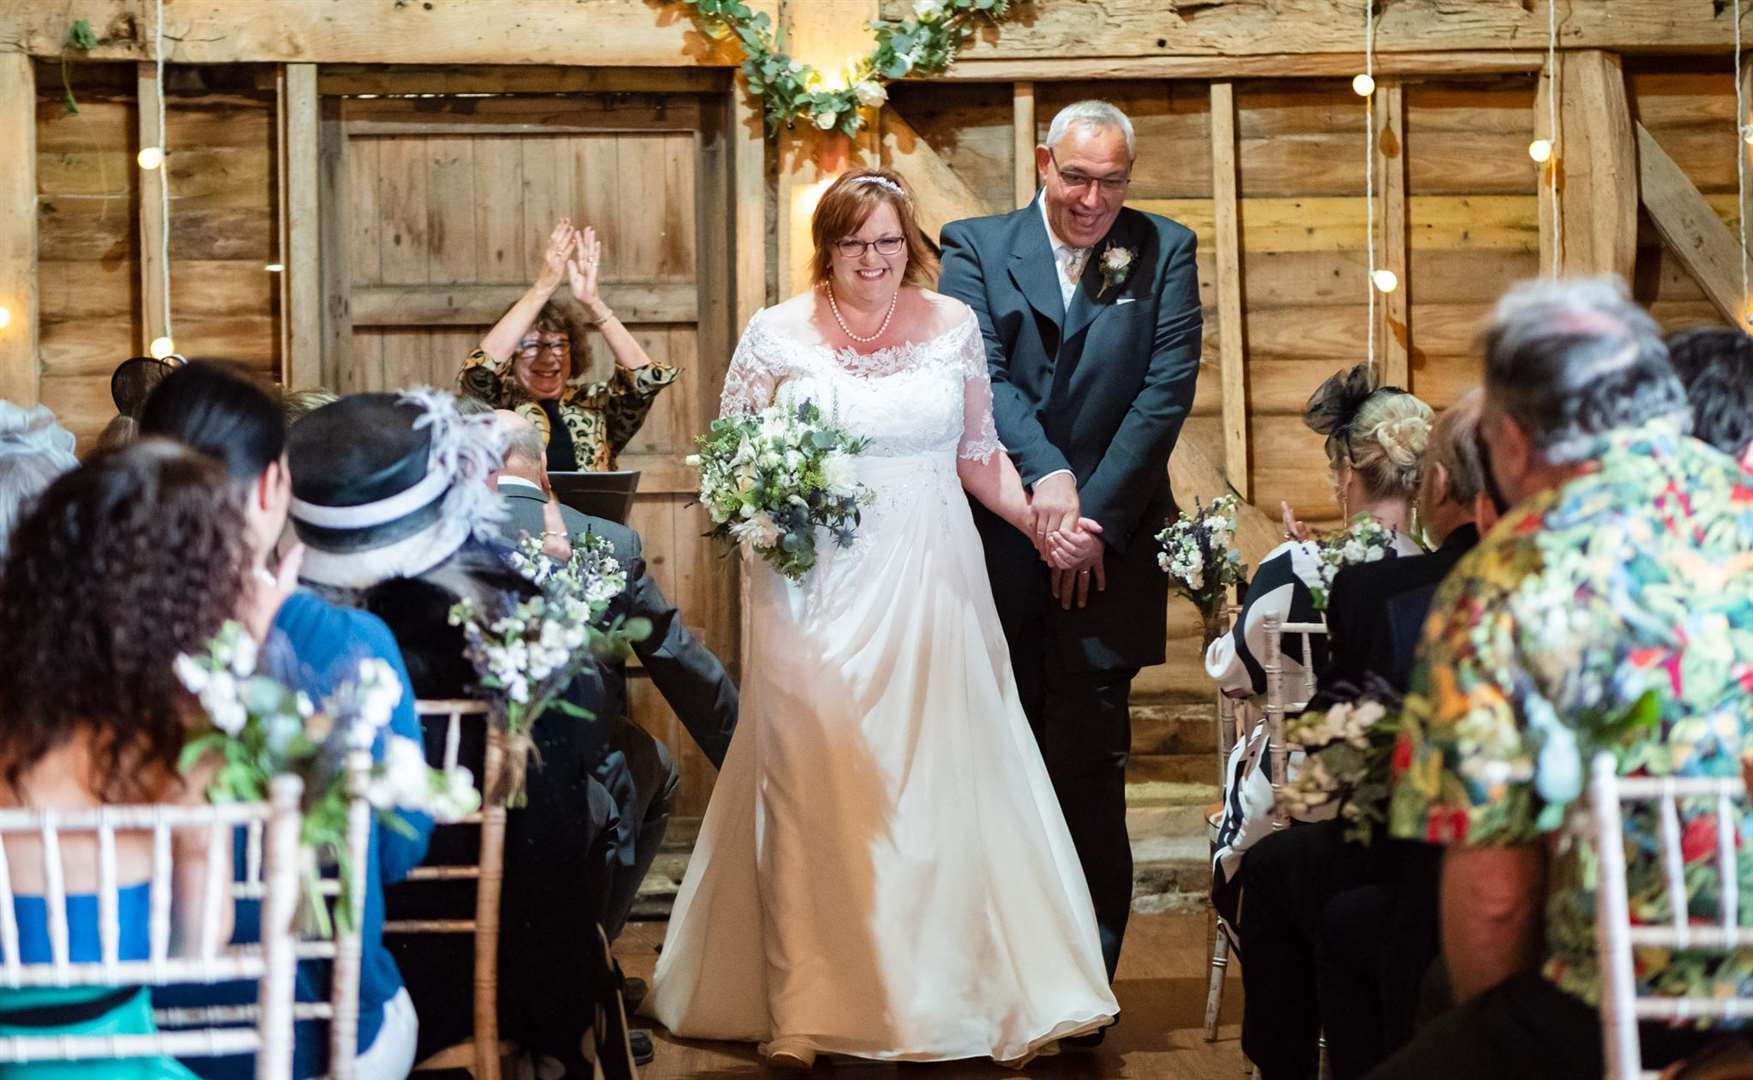 A couple being married at a humanist wedding in Tenterden in 2019